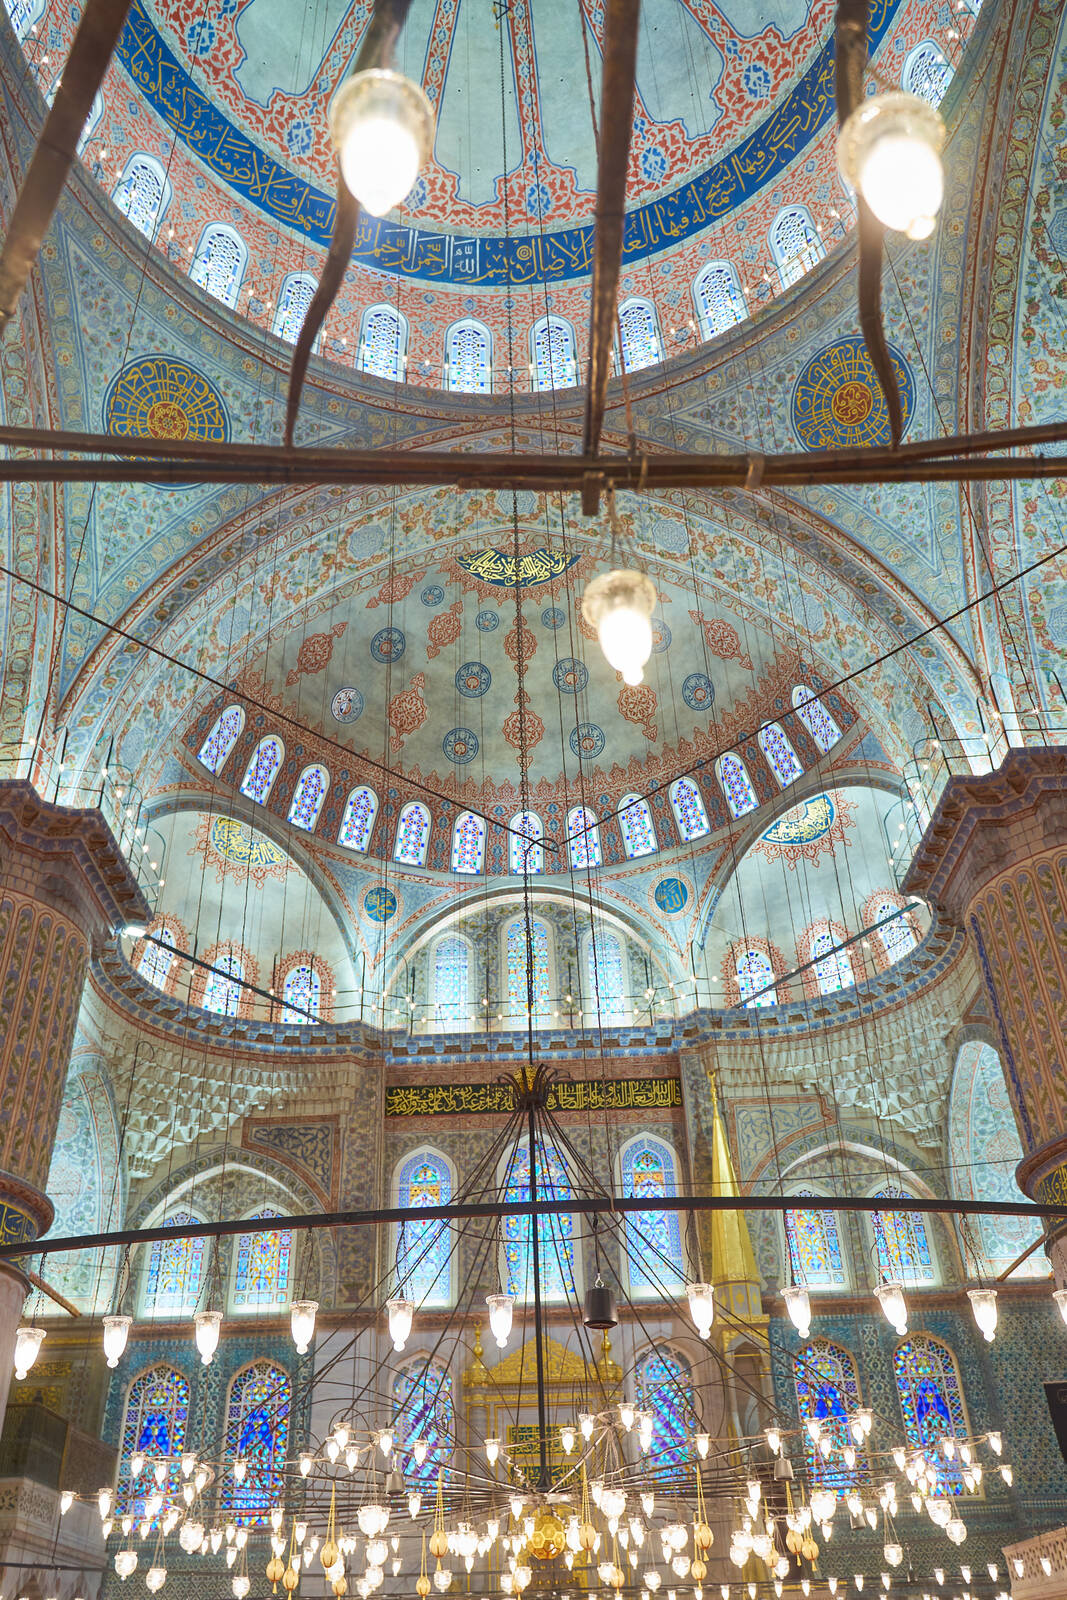 Image of Blue Mosque by Rostikslav Nepomnyaschiy